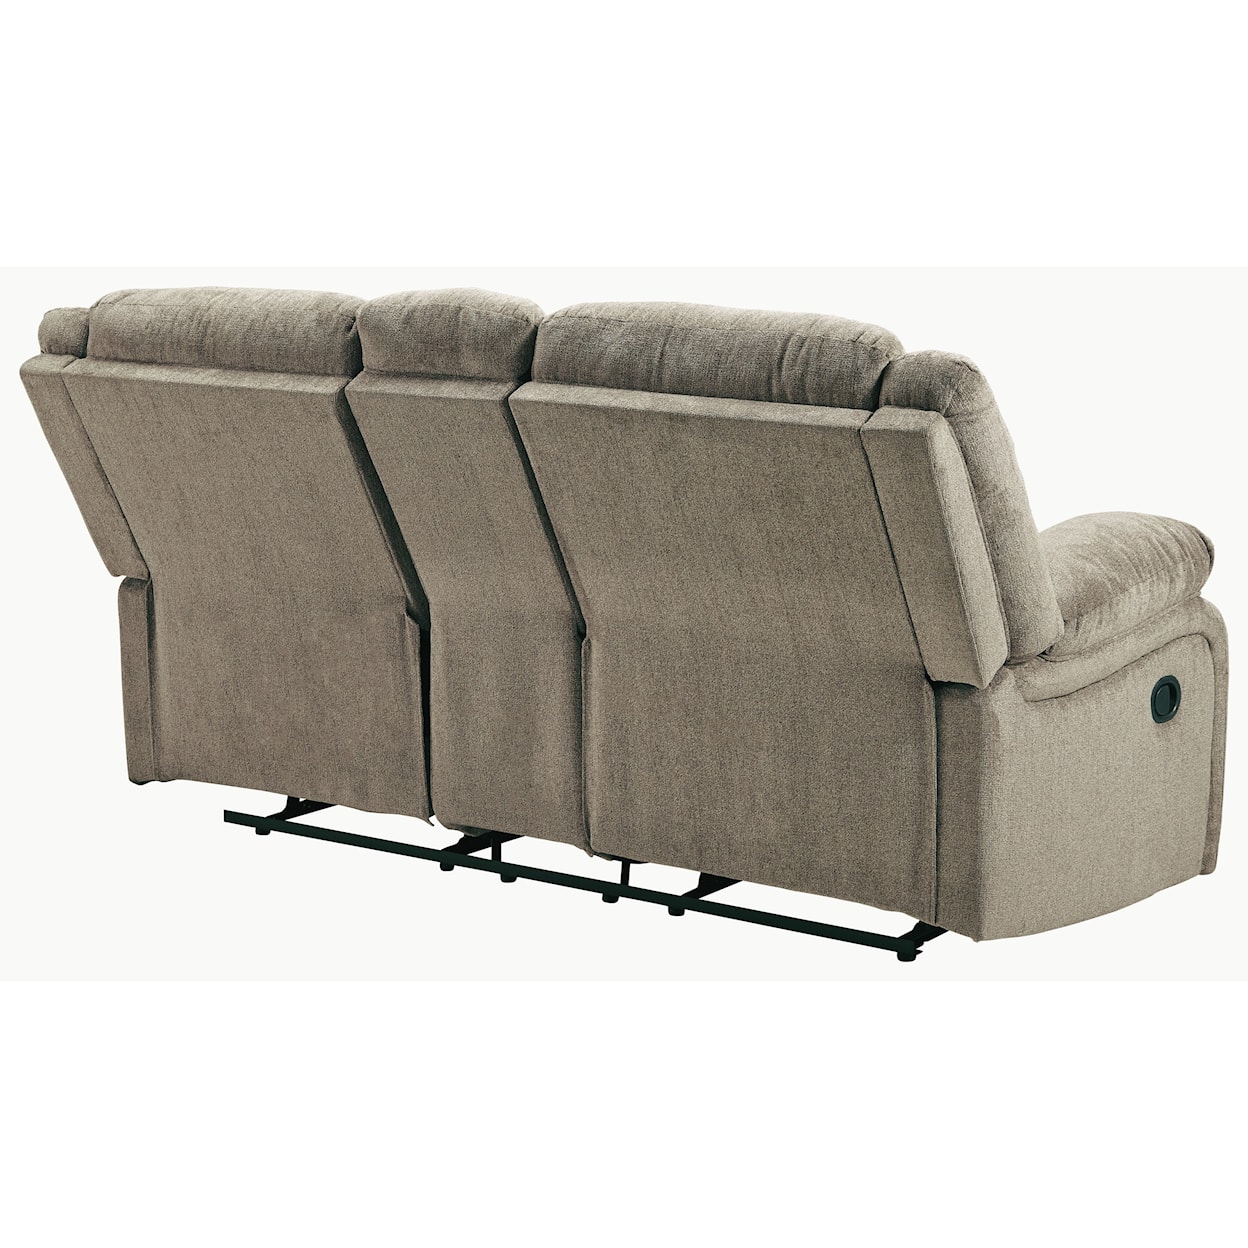 Benchcraft Draycoll Double Reclining Loveseat w/ Console